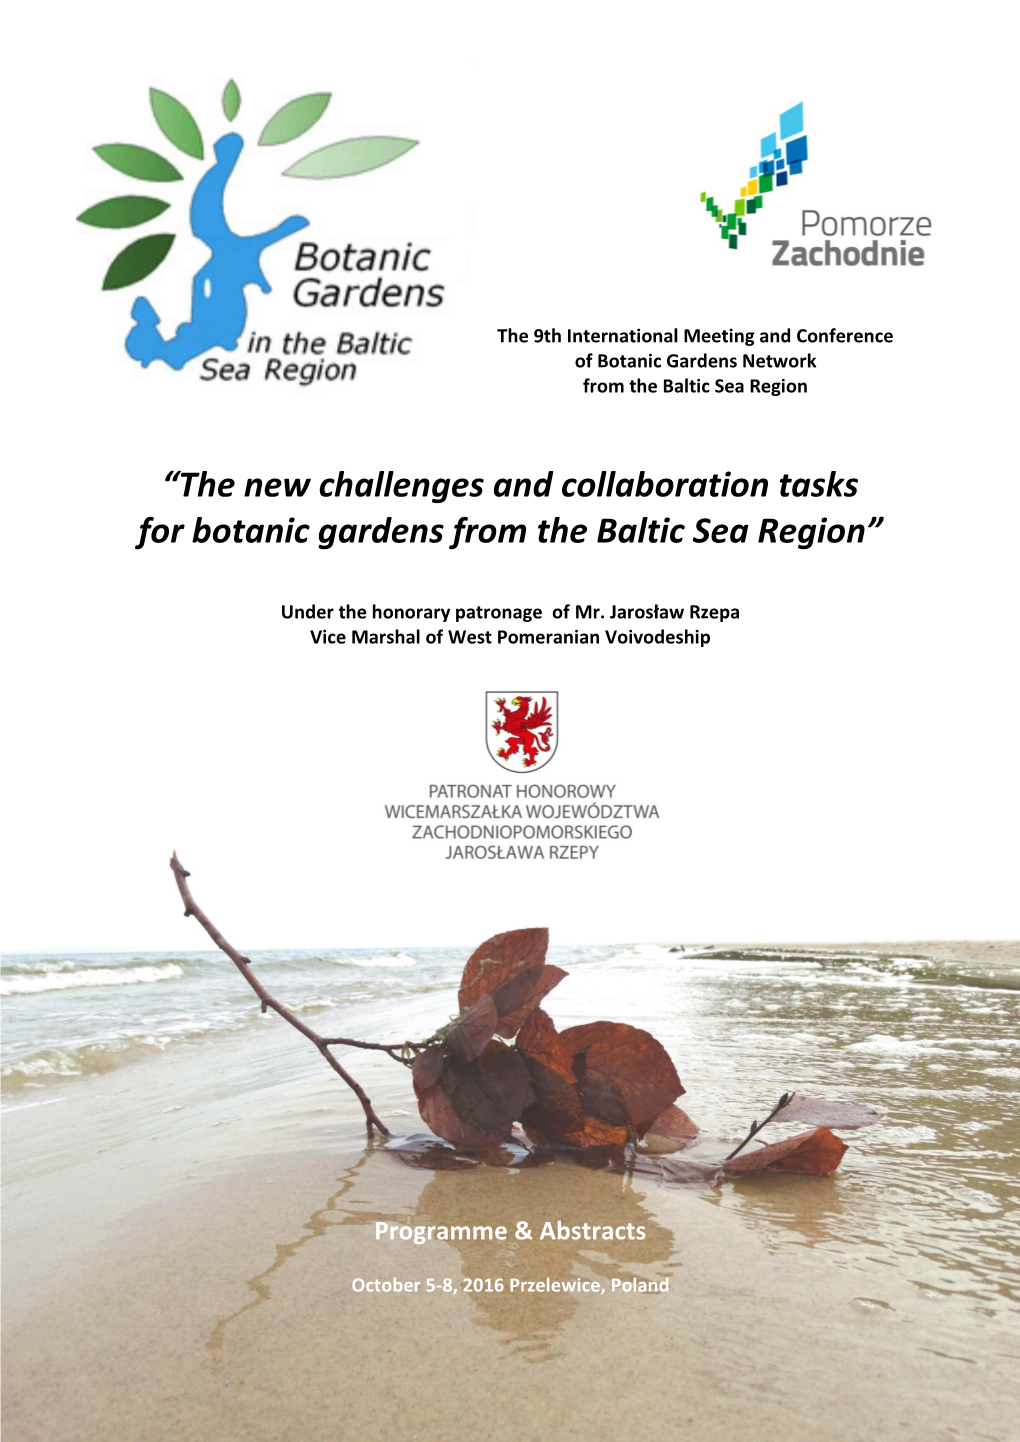 The New Challenges and Collaboration Tasks for Botanic Gardens from the Baltic Sea Region”